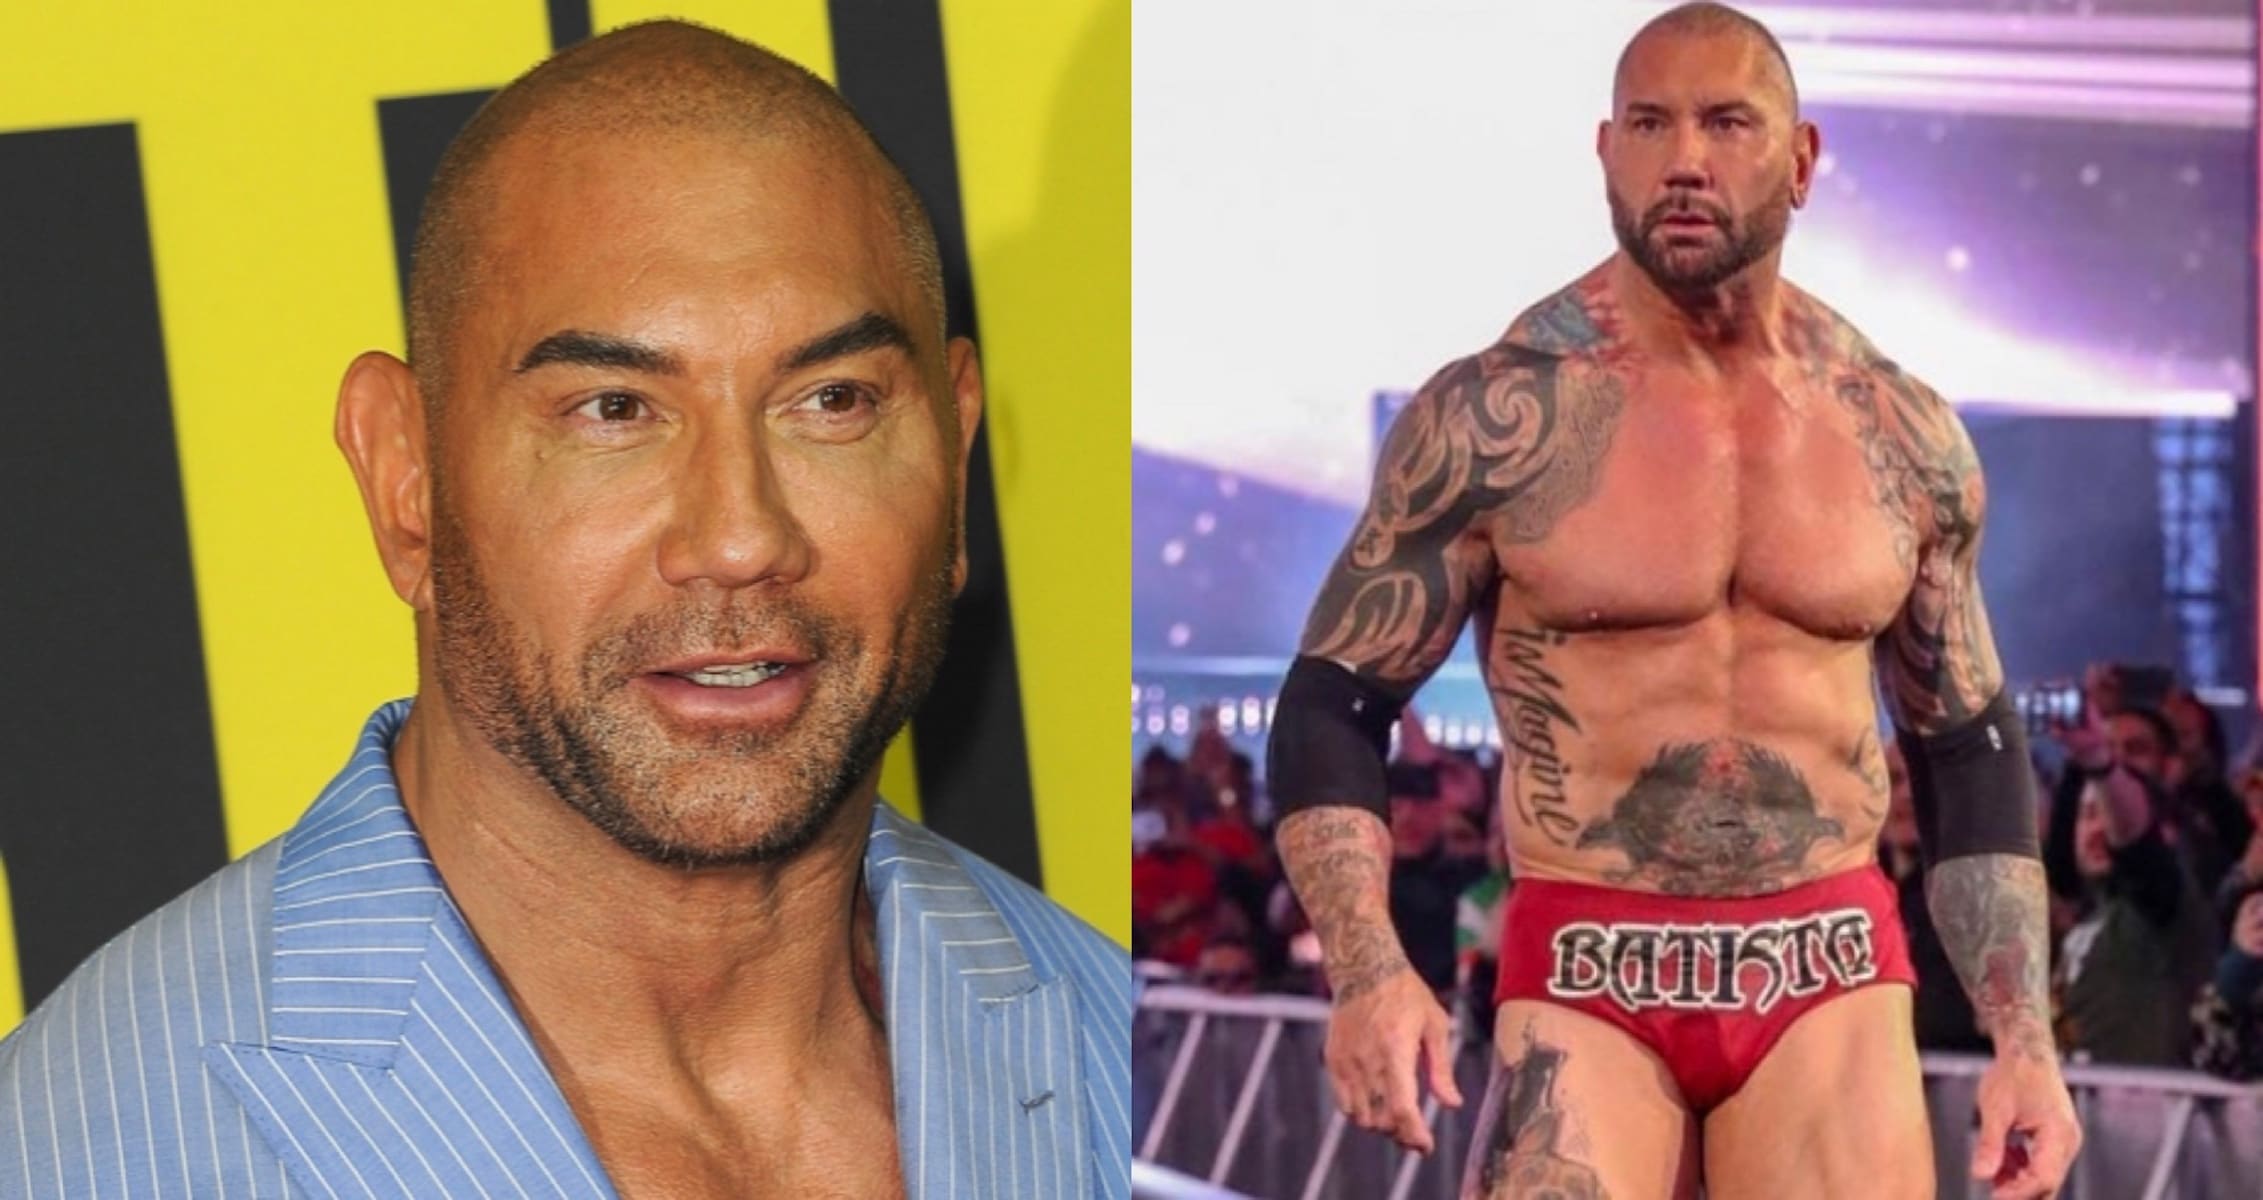 Dave Bautista Shares Home Gym And Plan To Go Vegan in Recent Video